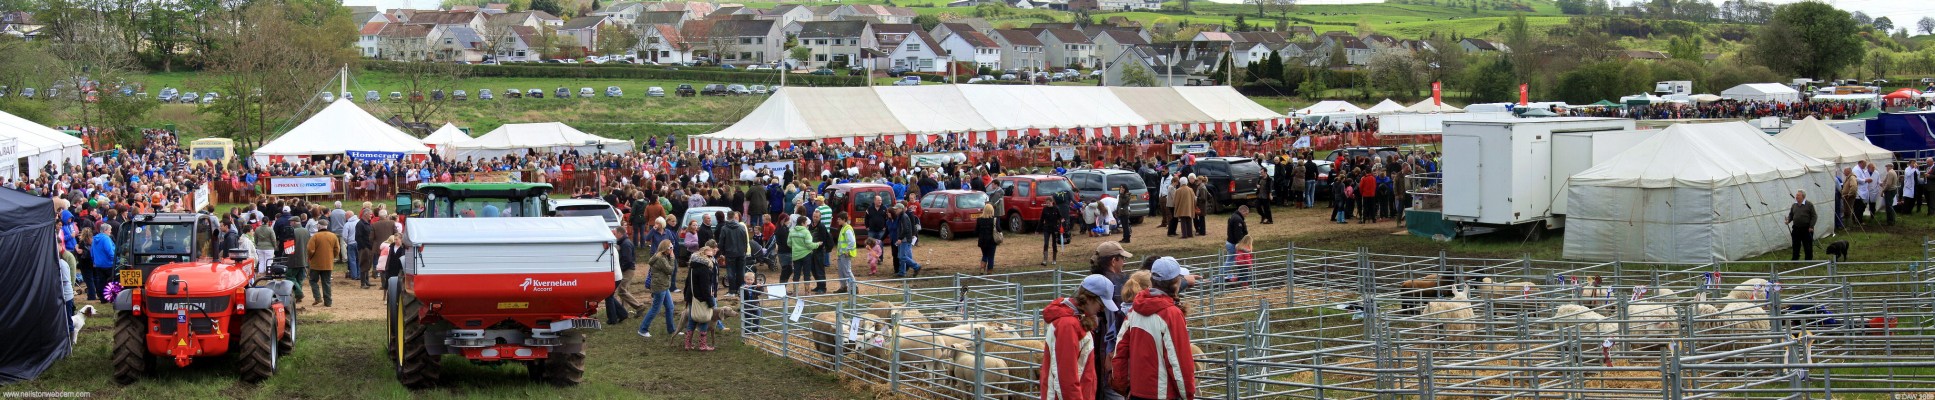 2009, over view of the show ground at the 184th Neilston Show
